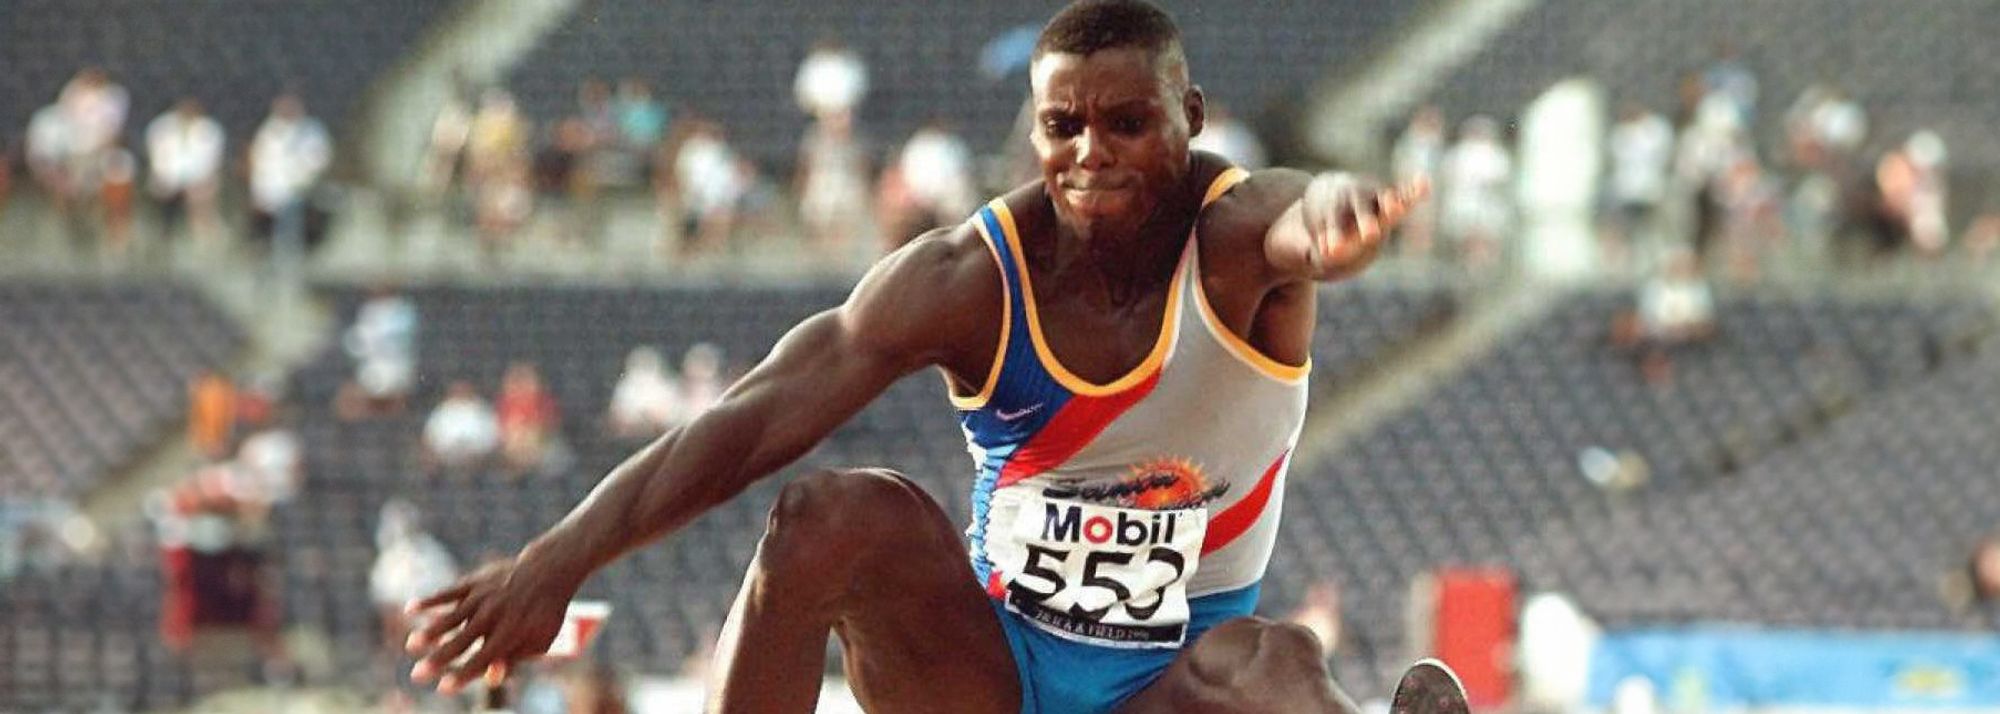 For Carl Lewis, the long jump competition at the 77th Millrose Games proved to be his first big test of 1984